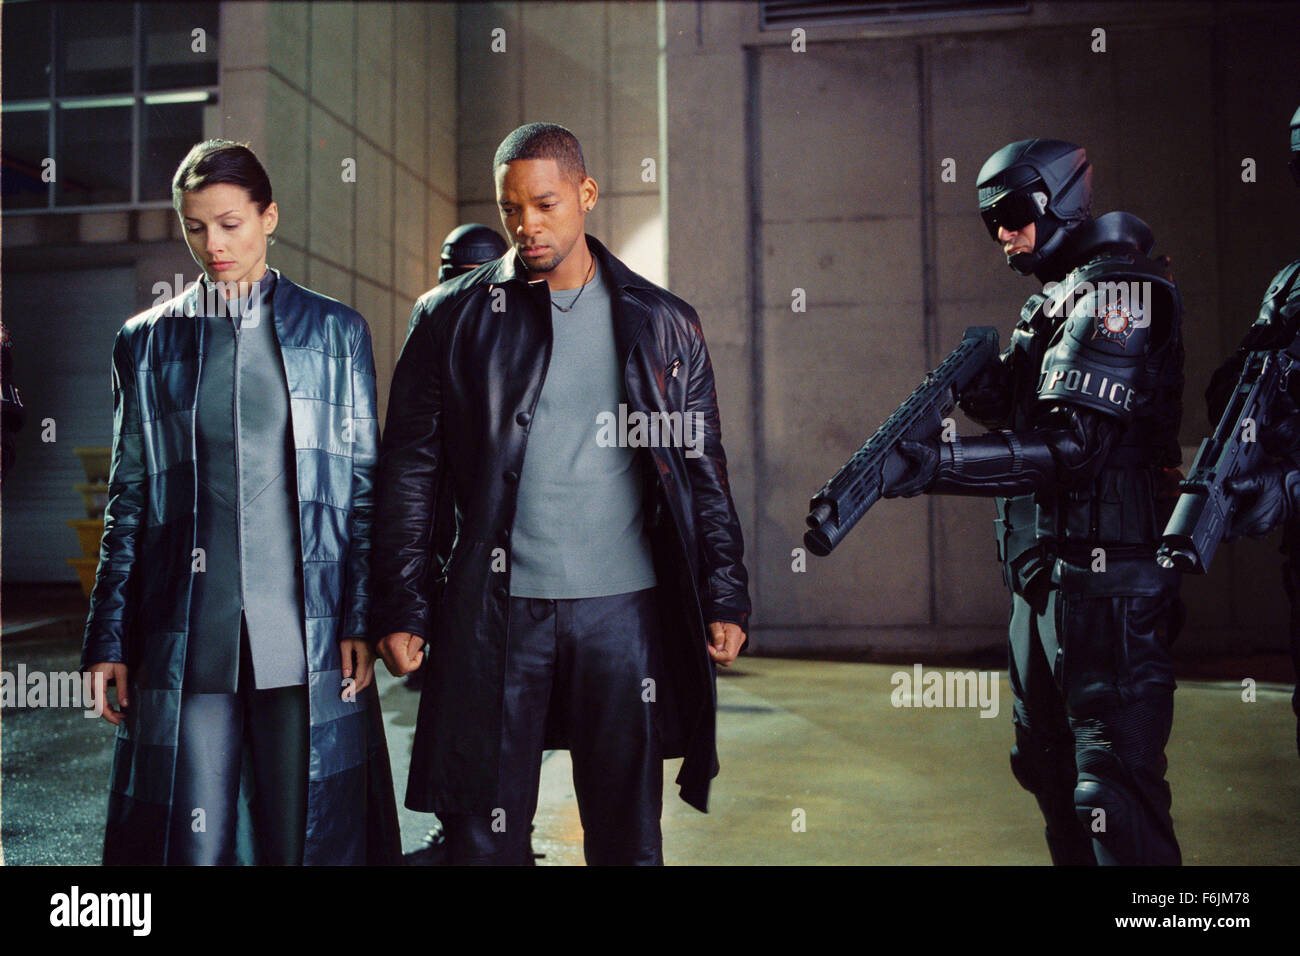 RELEASE DATE: July 16, 2004. MOVIE TITLE: I Robot. STUDIO: 20th Century Fox. PLOT: In the year 2035 a techno-phobic cop investigates a crime that may have been perpetrated by a robot, which leads to a larger threat to humanity. PICTURED: BRIDGET MOYNAHAN as Susan and WILL SMITH as Del Spooner. Stock Photo